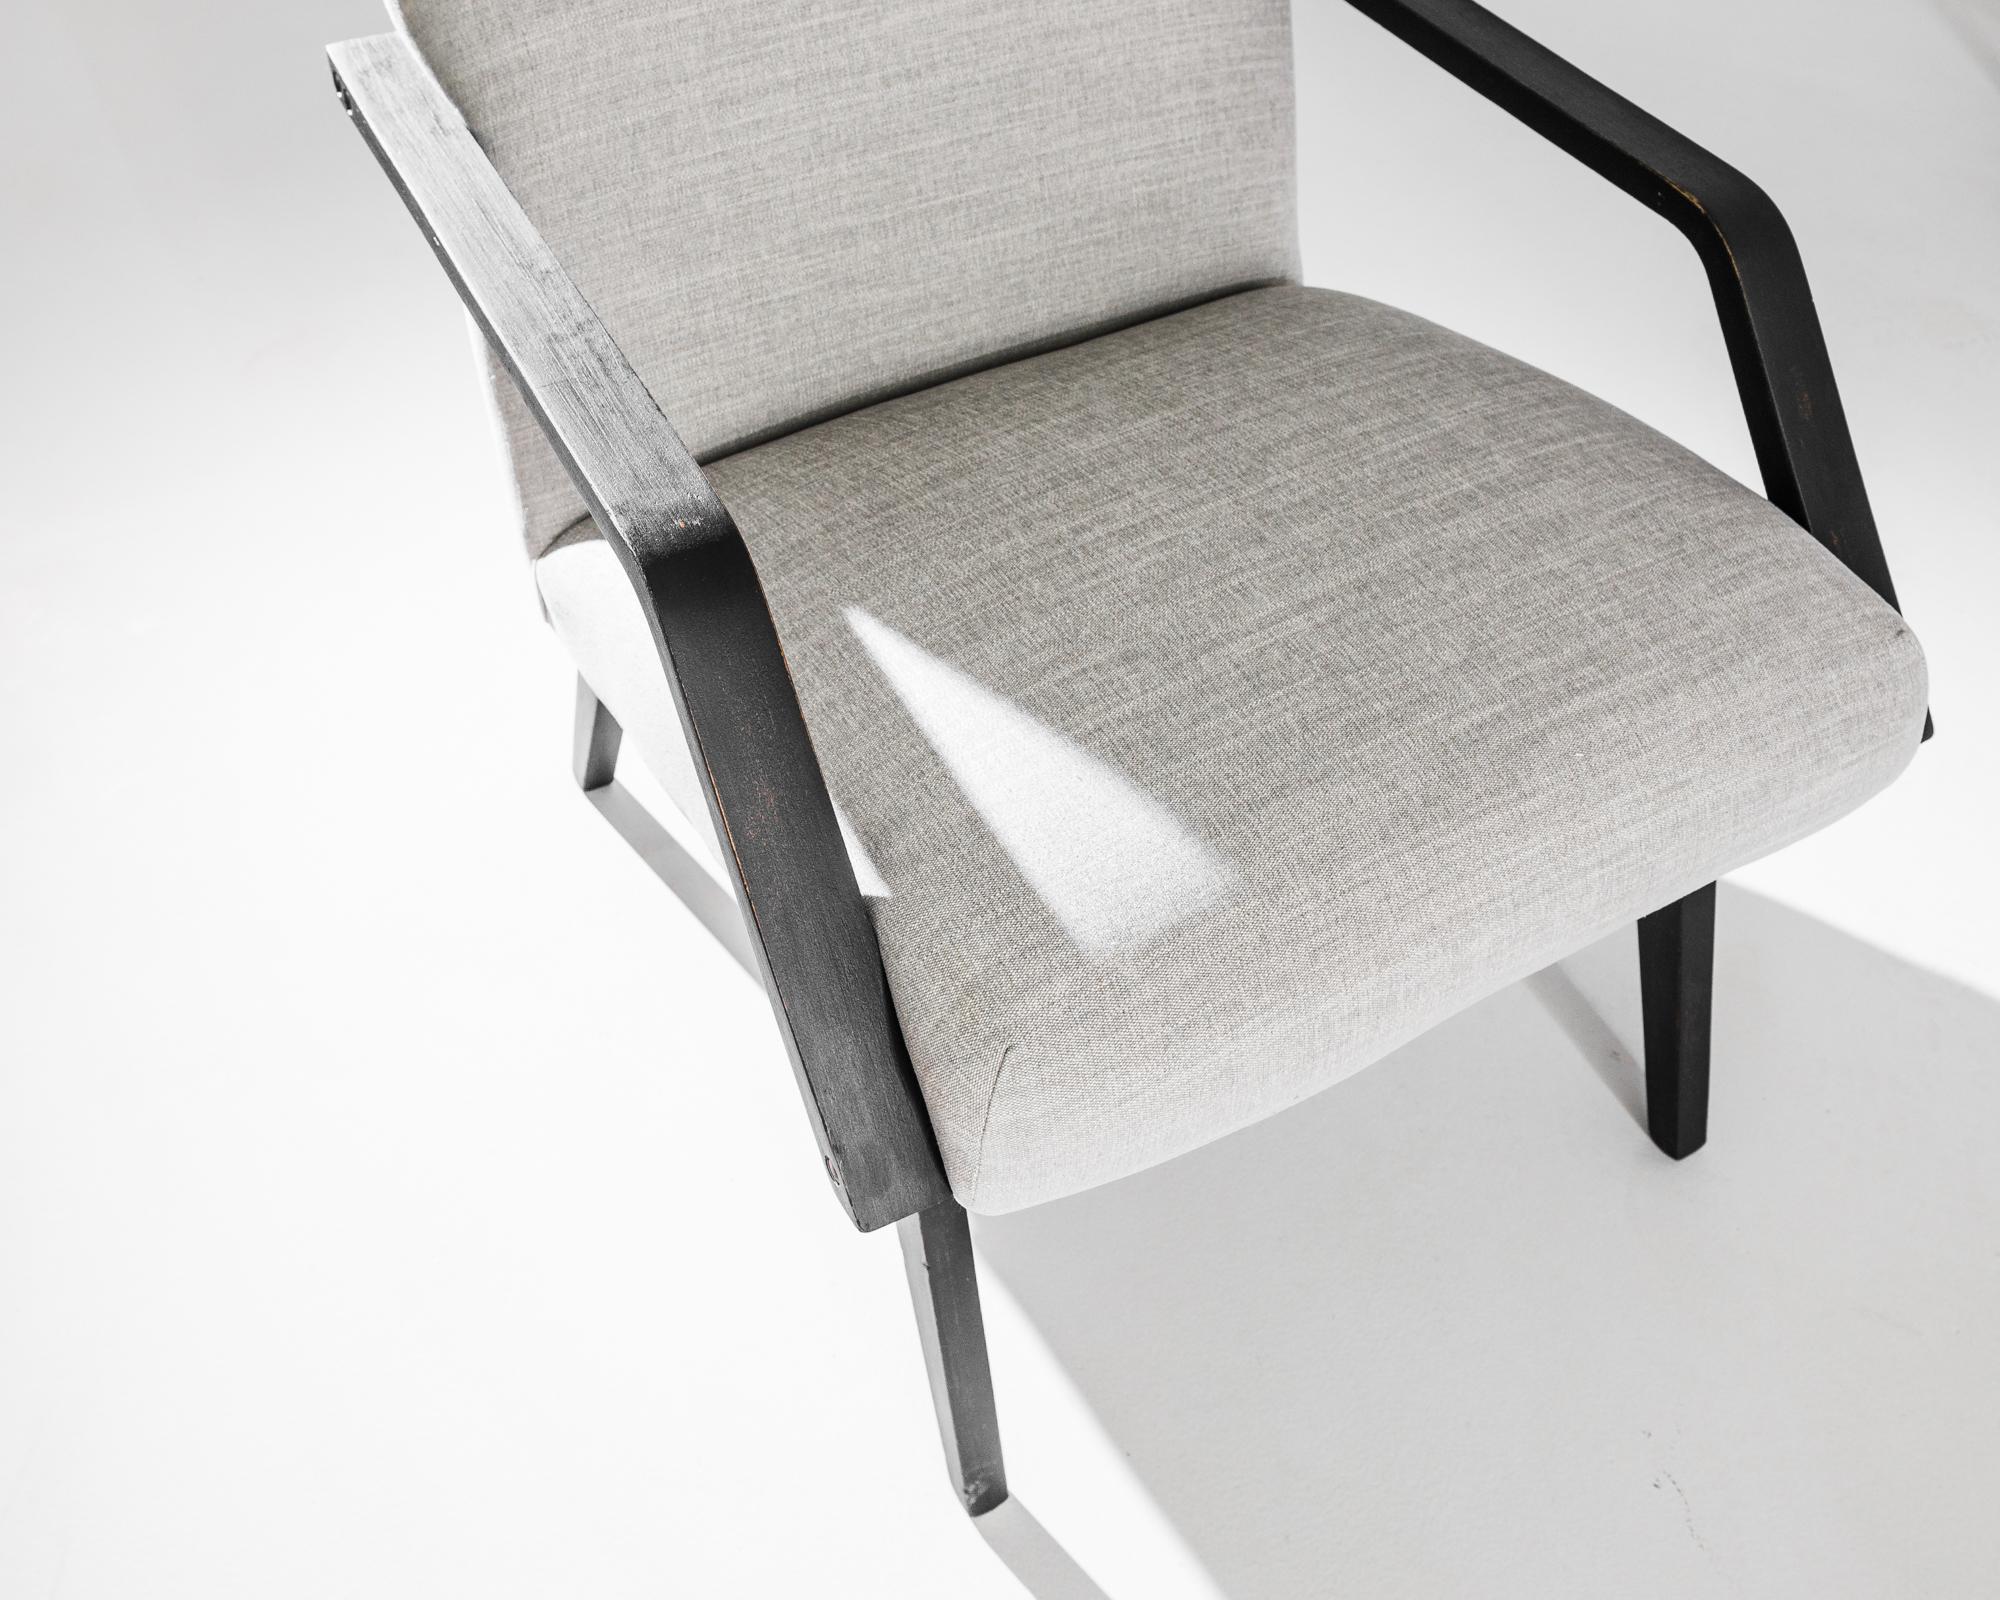 A pair of armchairs produced in the former Czechoslovakia. This 1960s design is re-upholstered in an updated grey fabric, the neutral tone was chosen to compliment the elegant black of the hardwood frame. Comfortable angles and clean lines, the